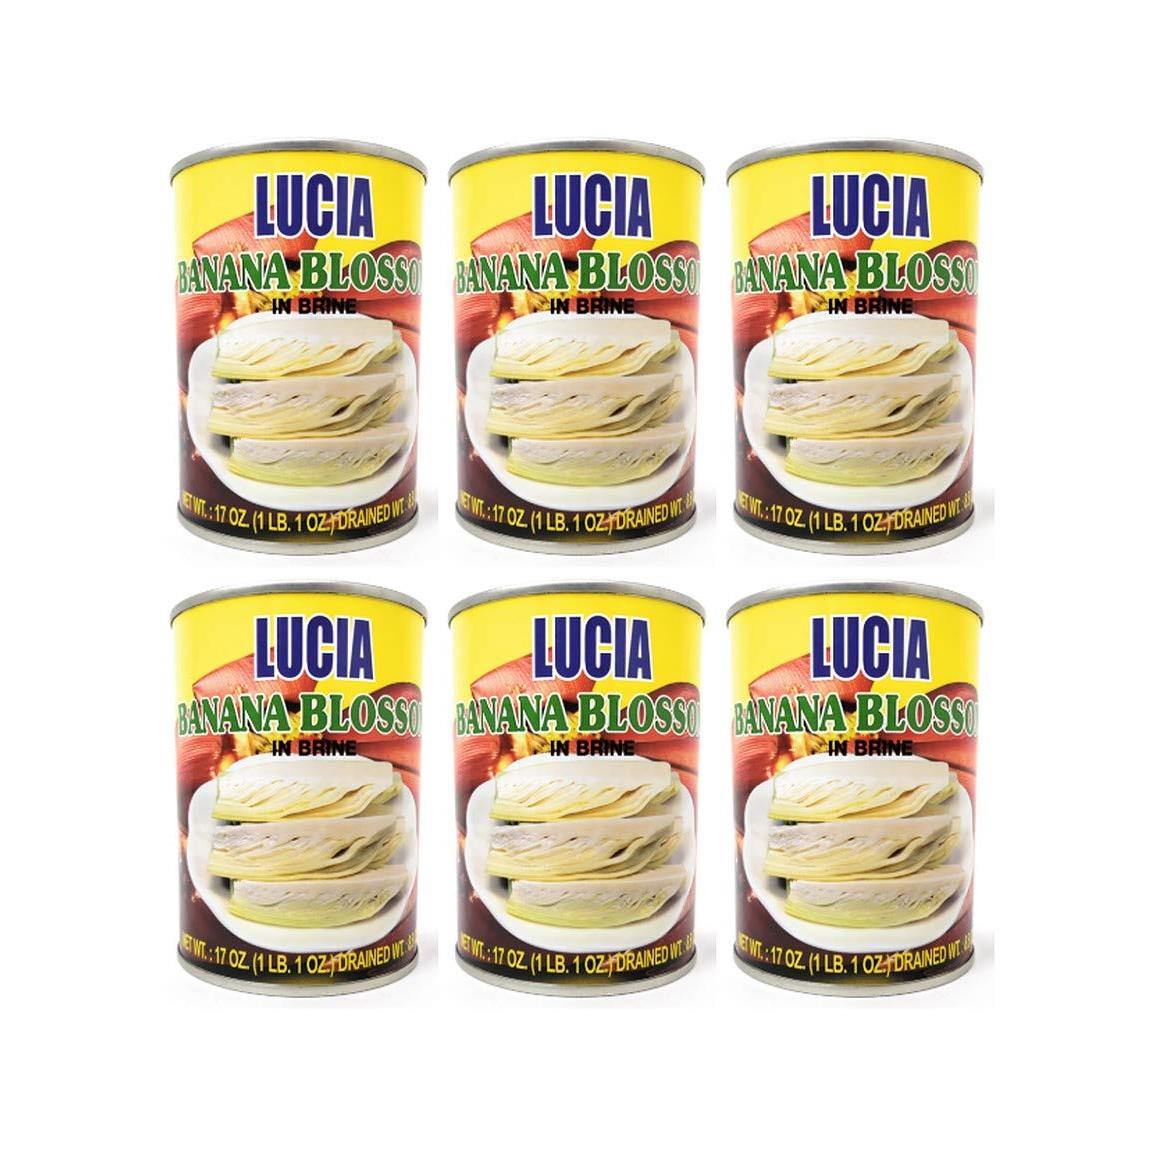 Lucia Banana Blossom in Brine (6 Pack, Total of 102oz)